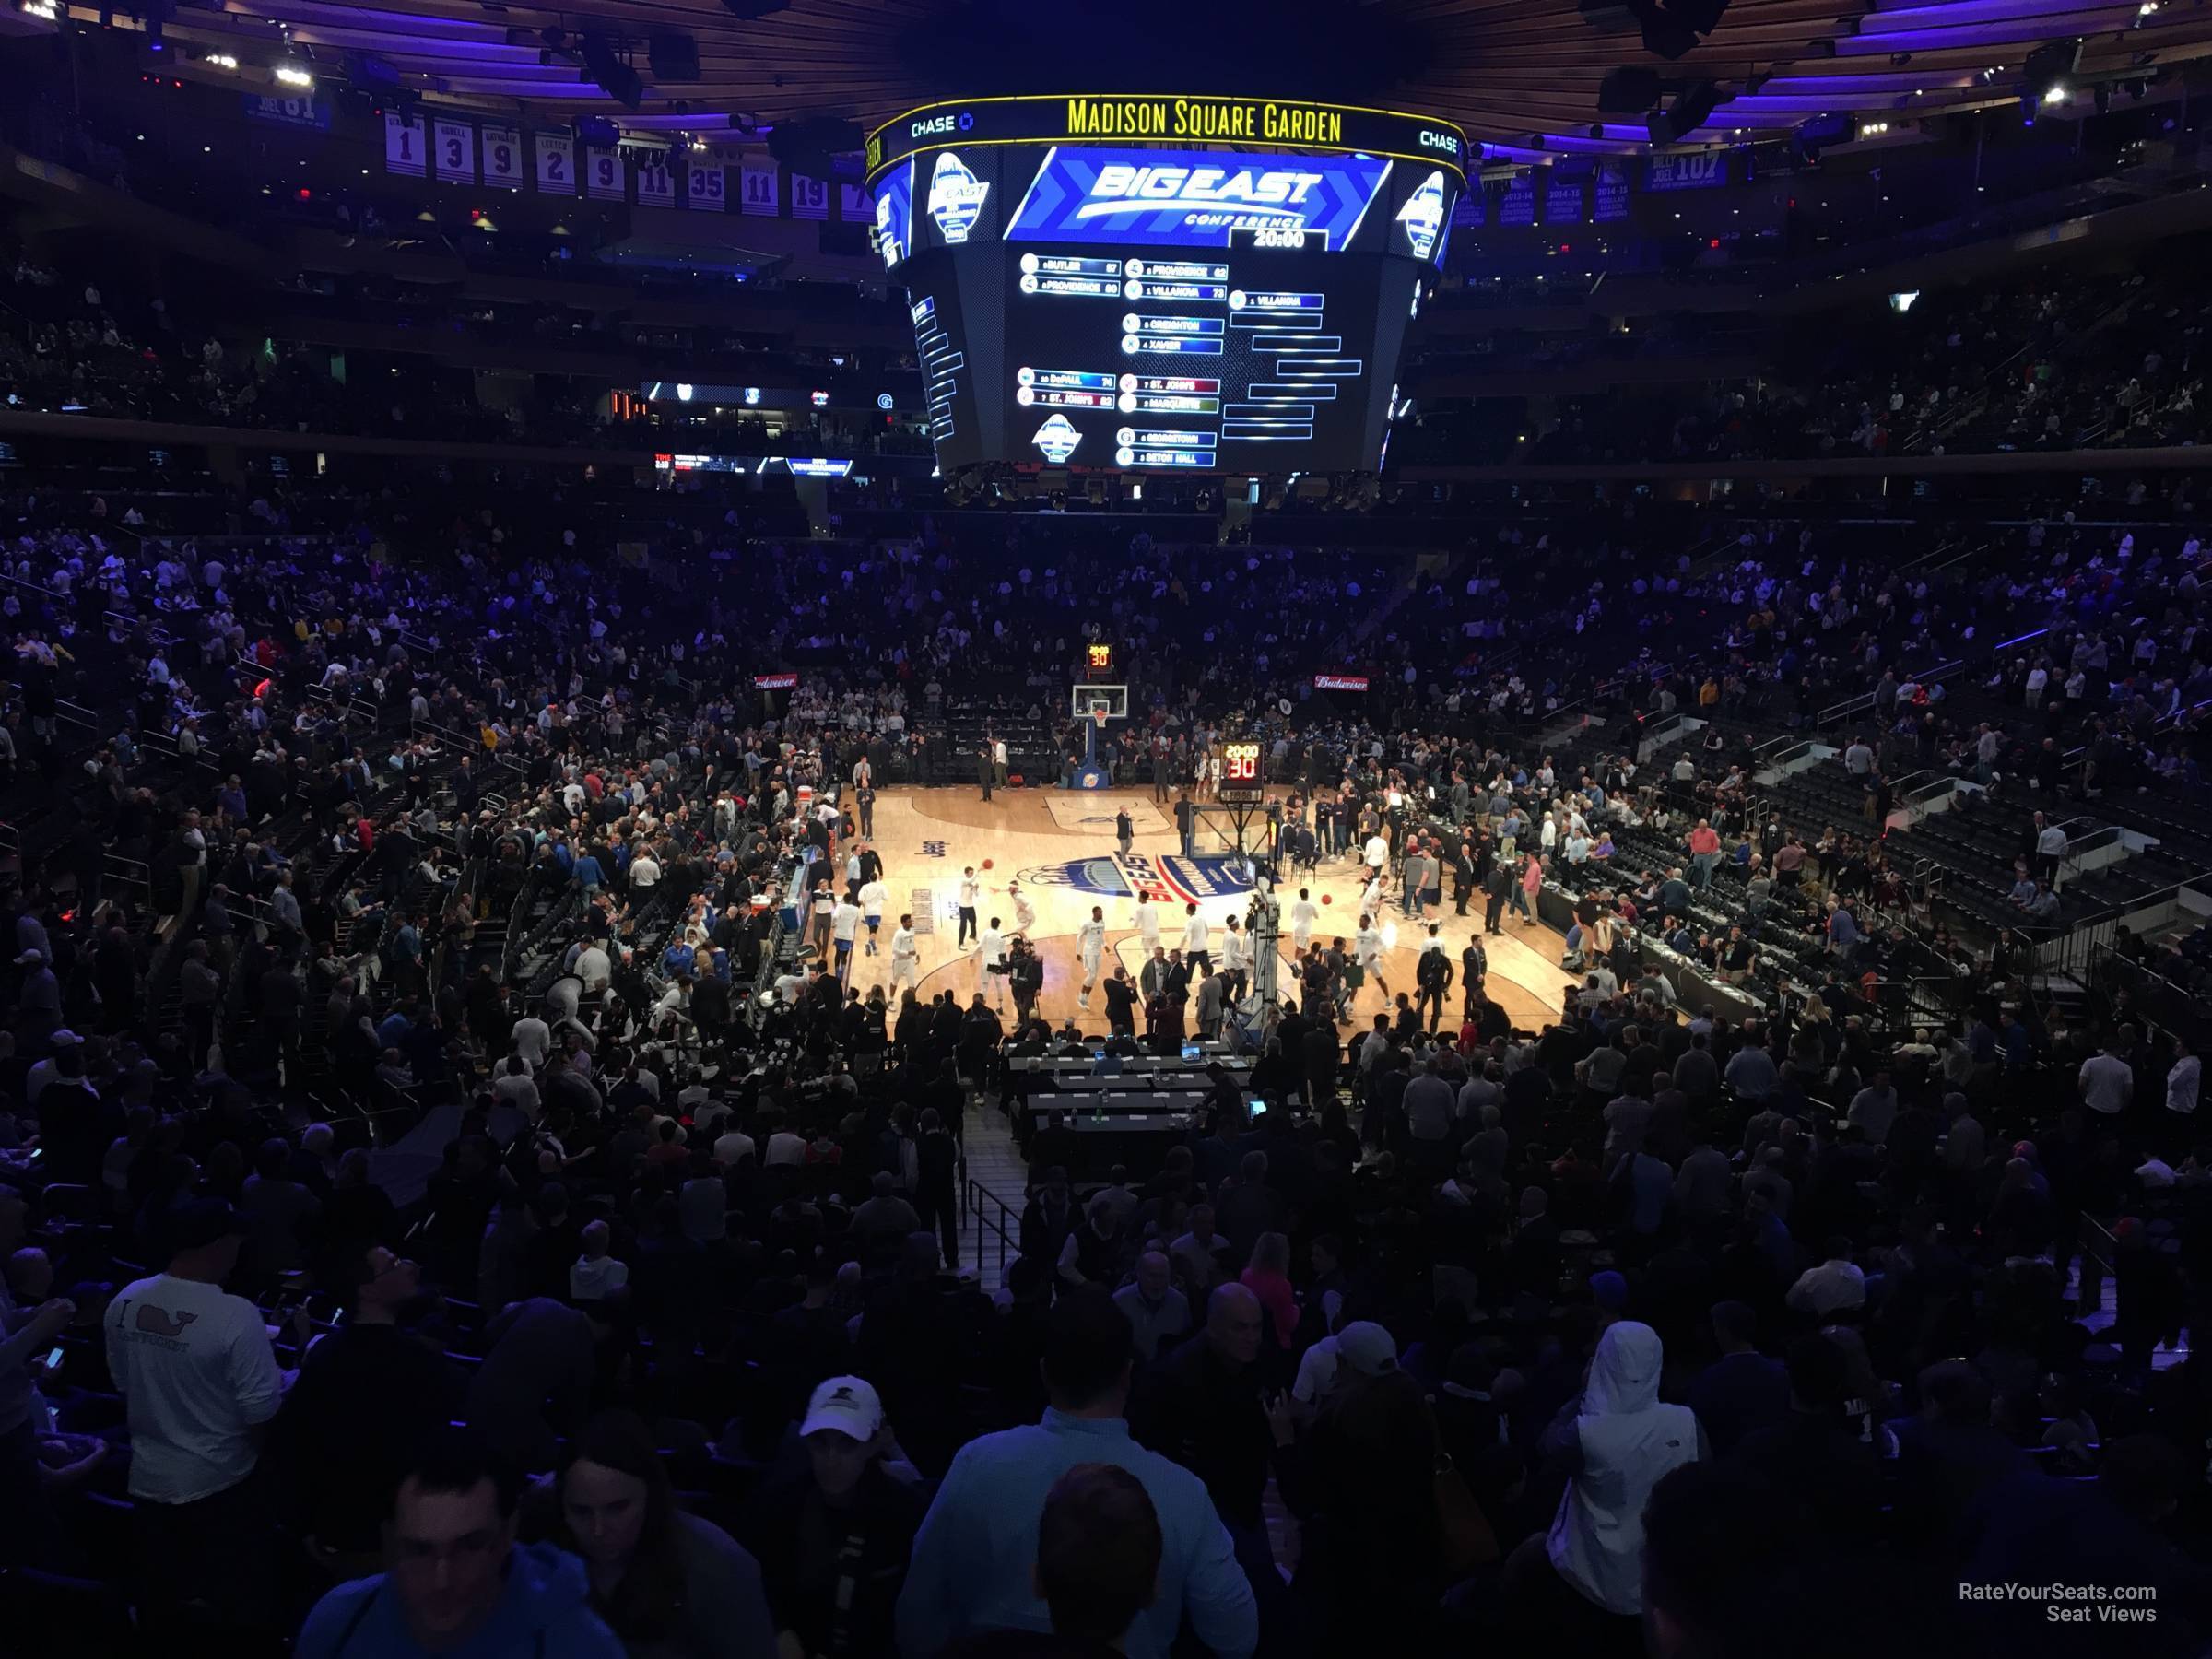 madison club 61, row 1 seat view  for basketball - madison square garden